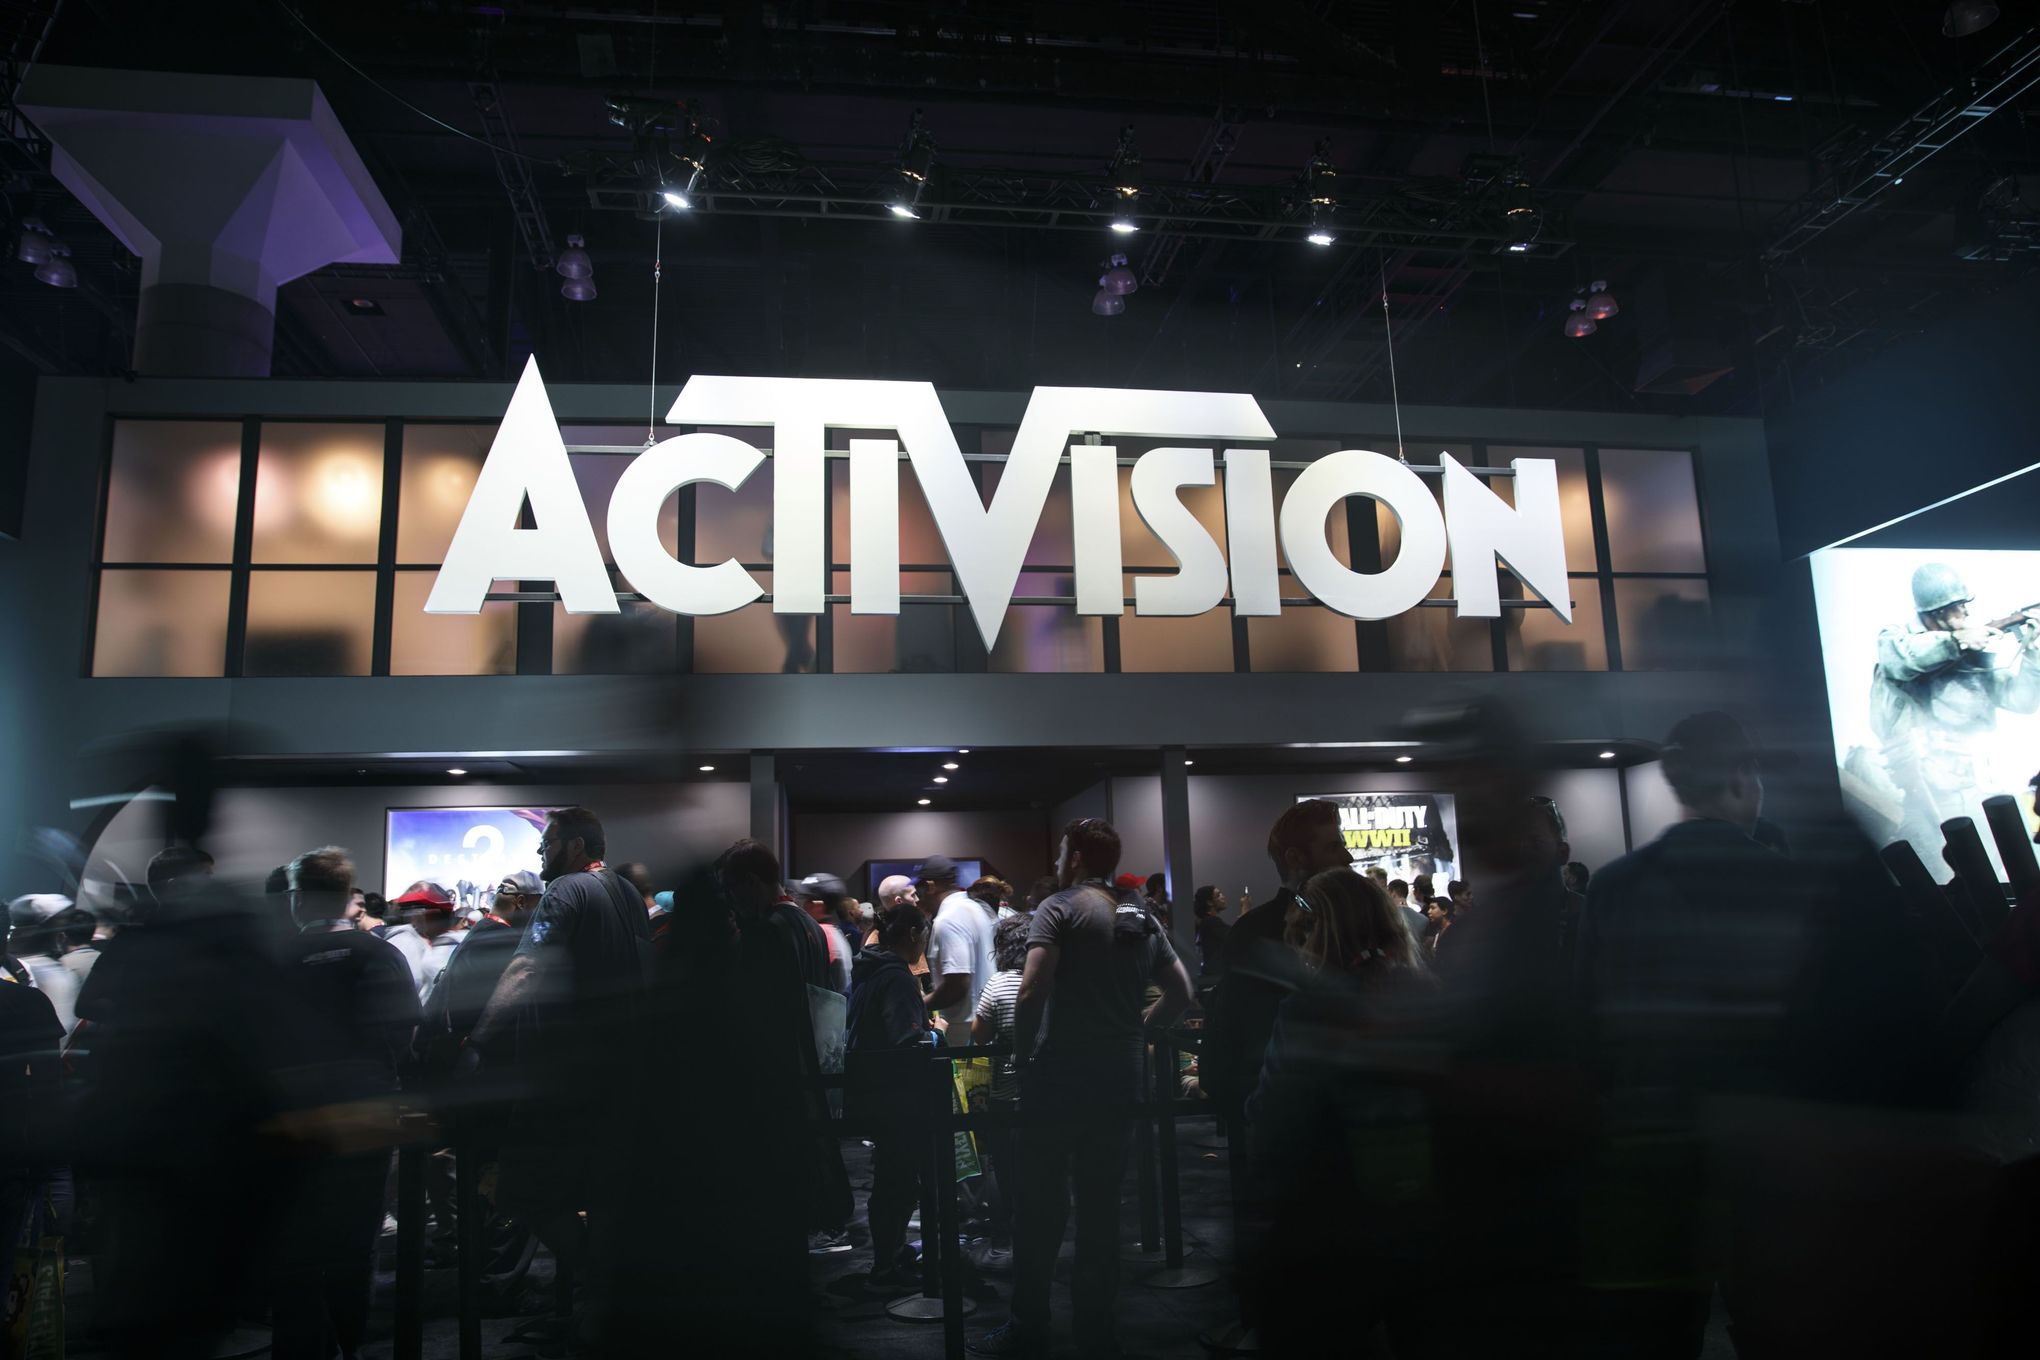 Activision stock now is higher than its ever been in 26 years